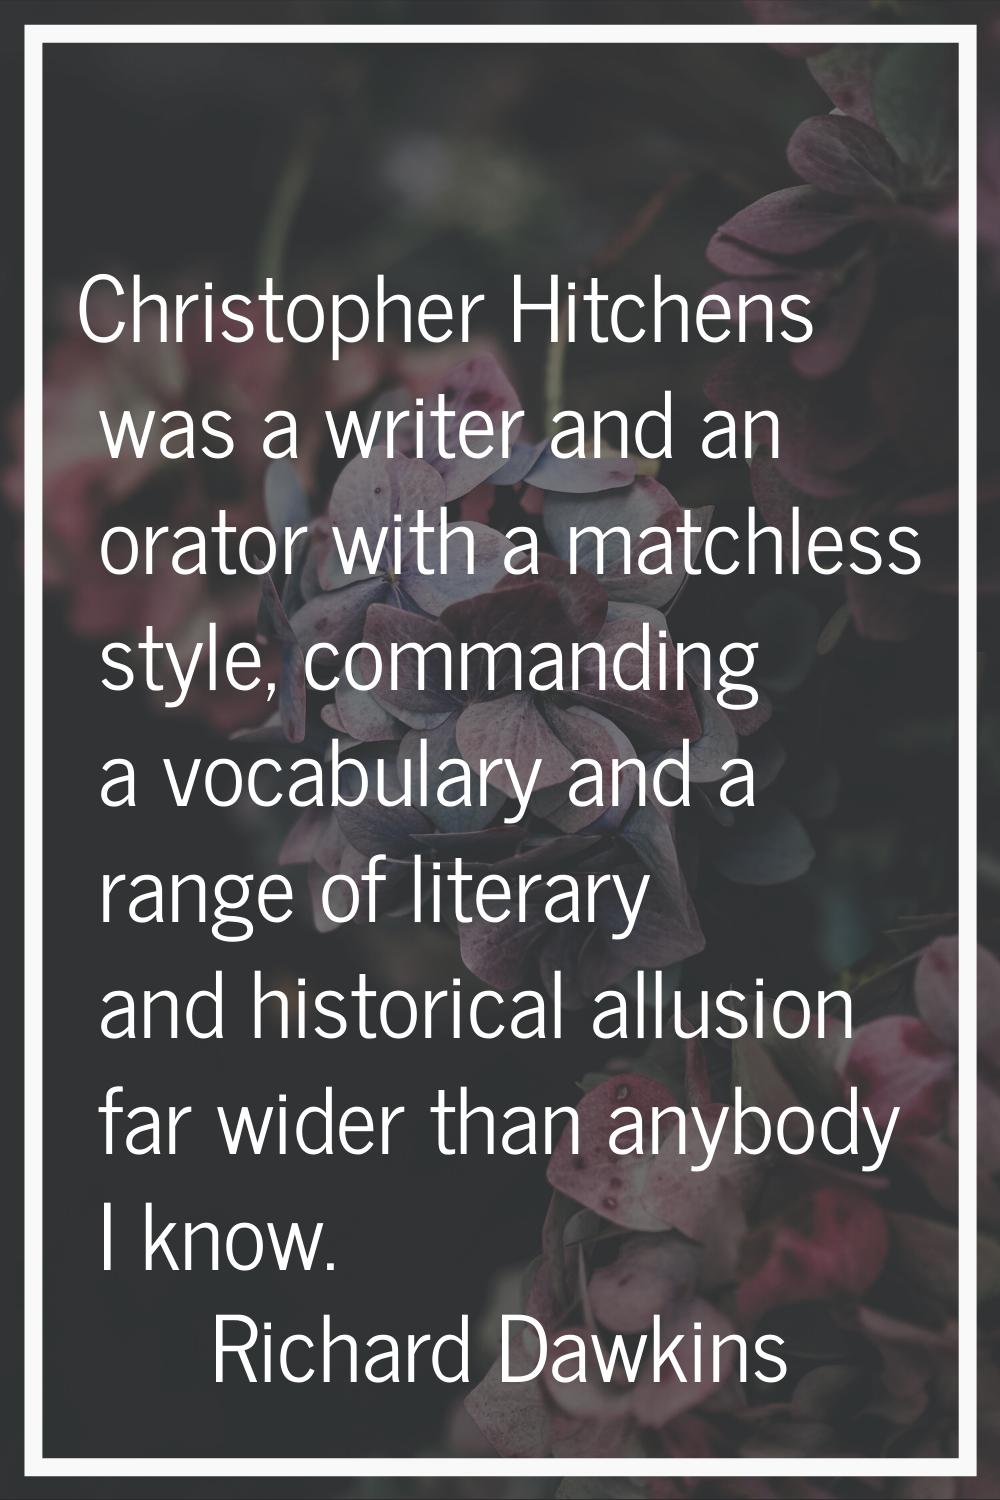 Christopher Hitchens was a writer and an orator with a matchless style, commanding a vocabulary and